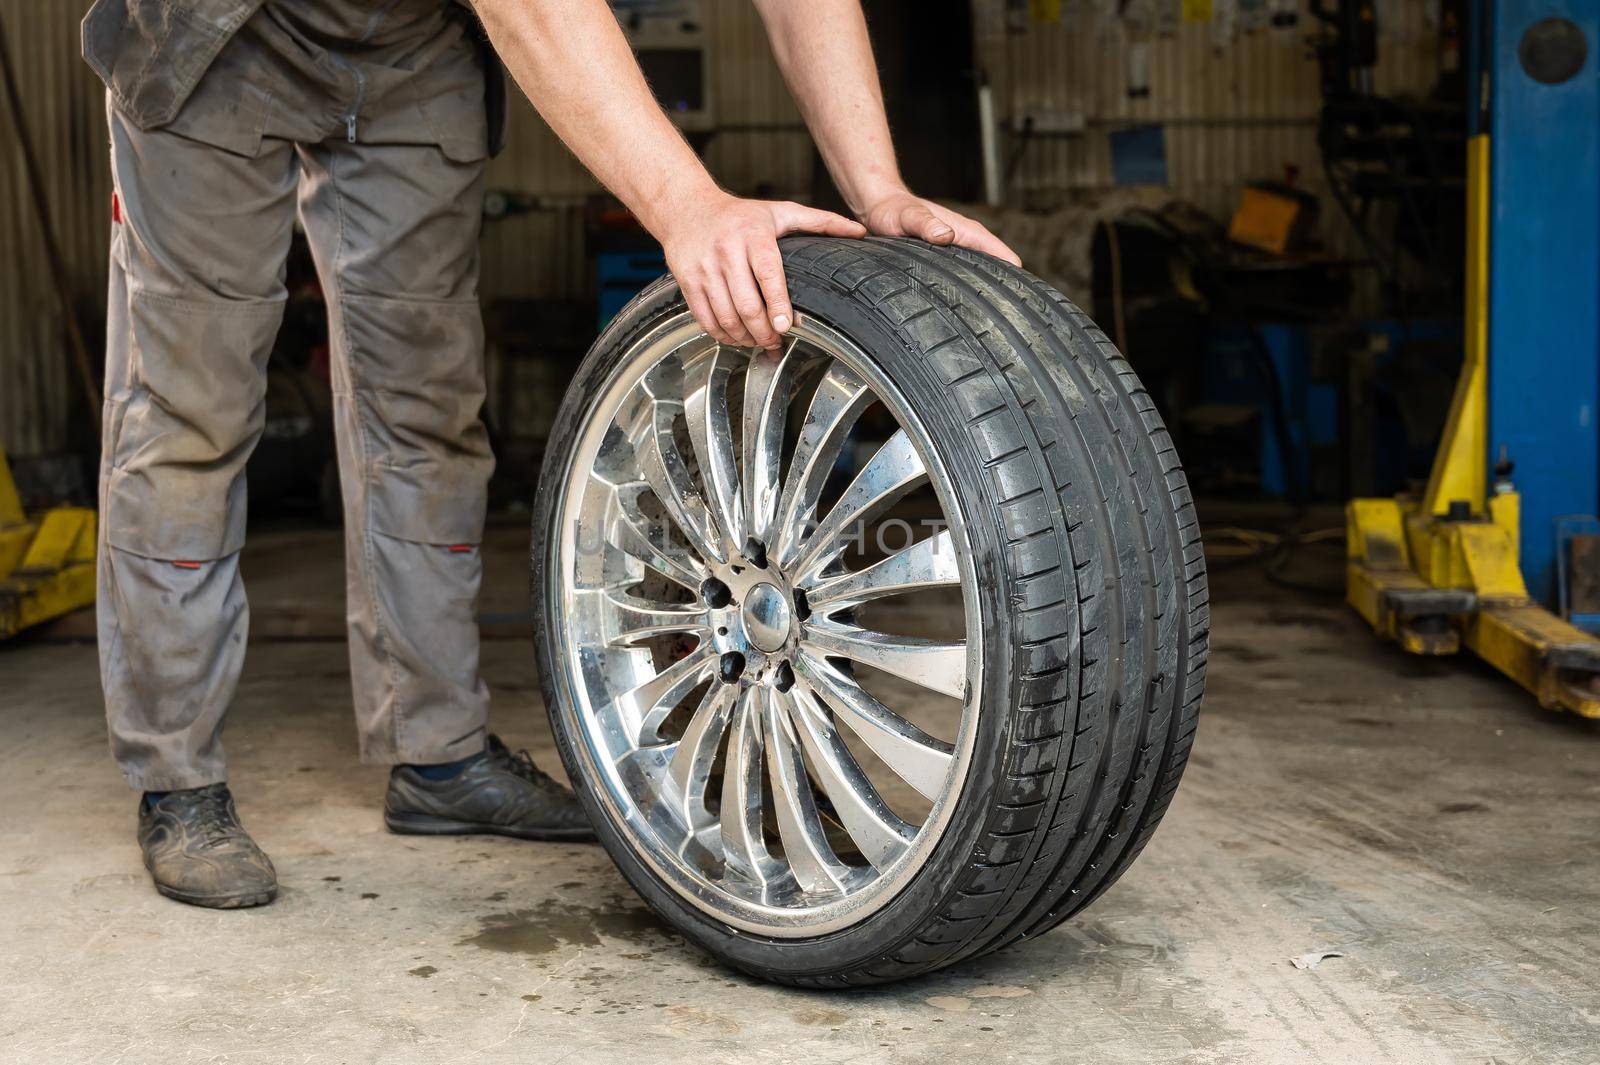 An auto mechanic holds a wheel of a car. Change of car tires according to the season.